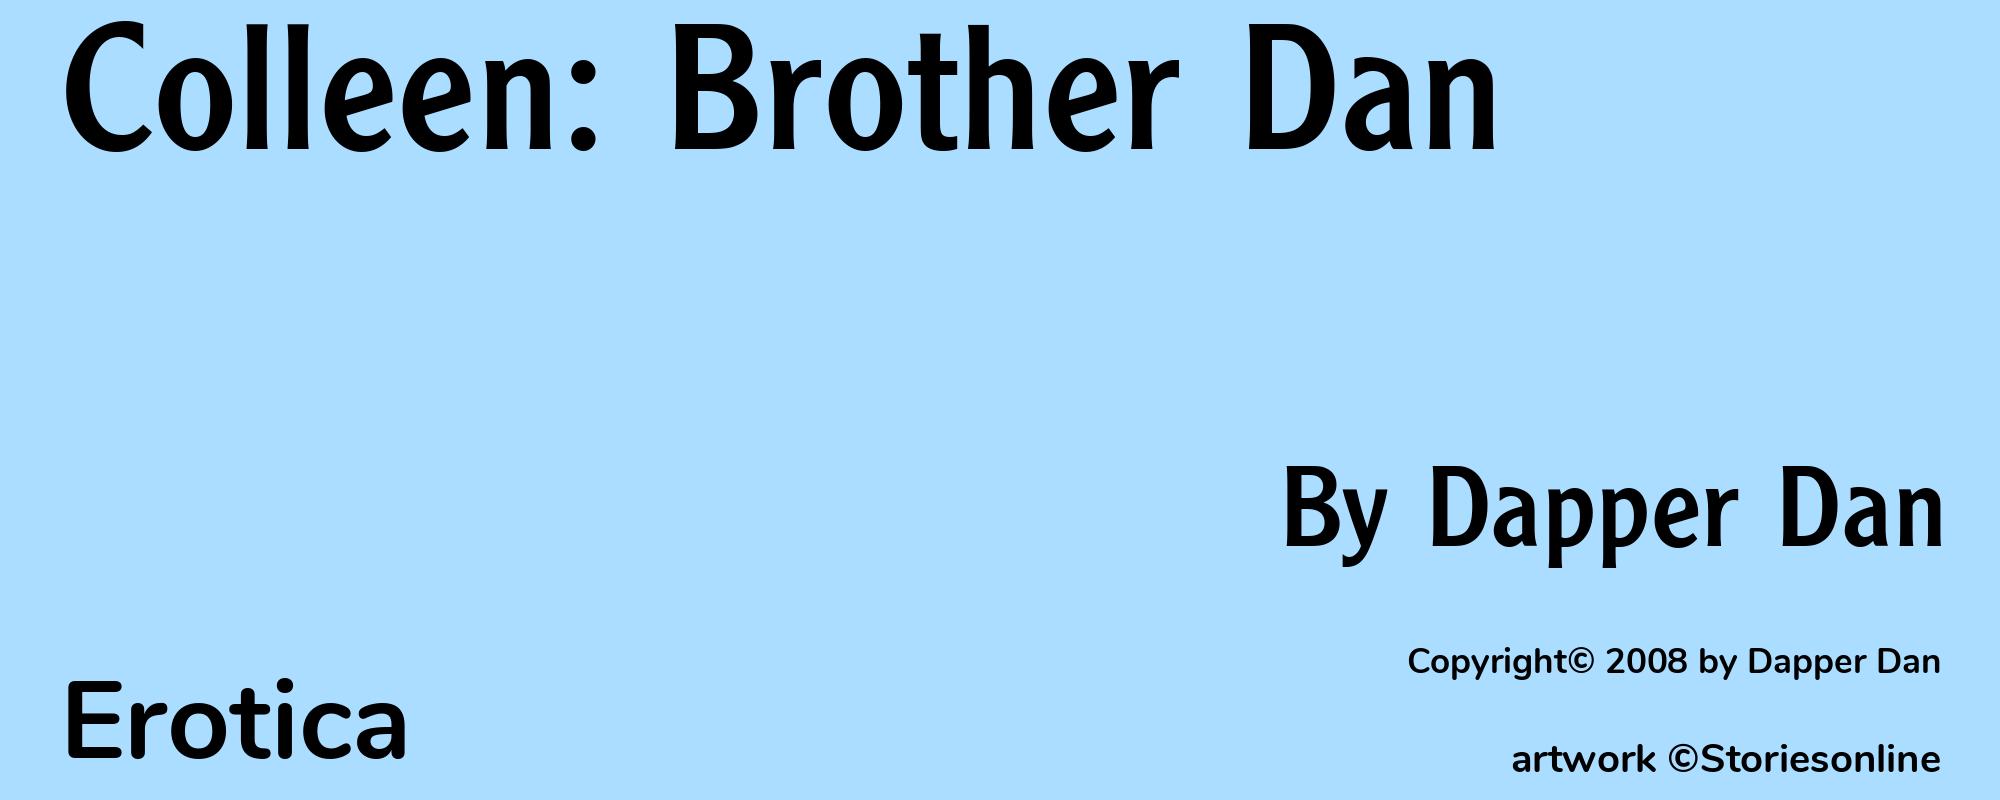 Colleen: Brother Dan - Cover